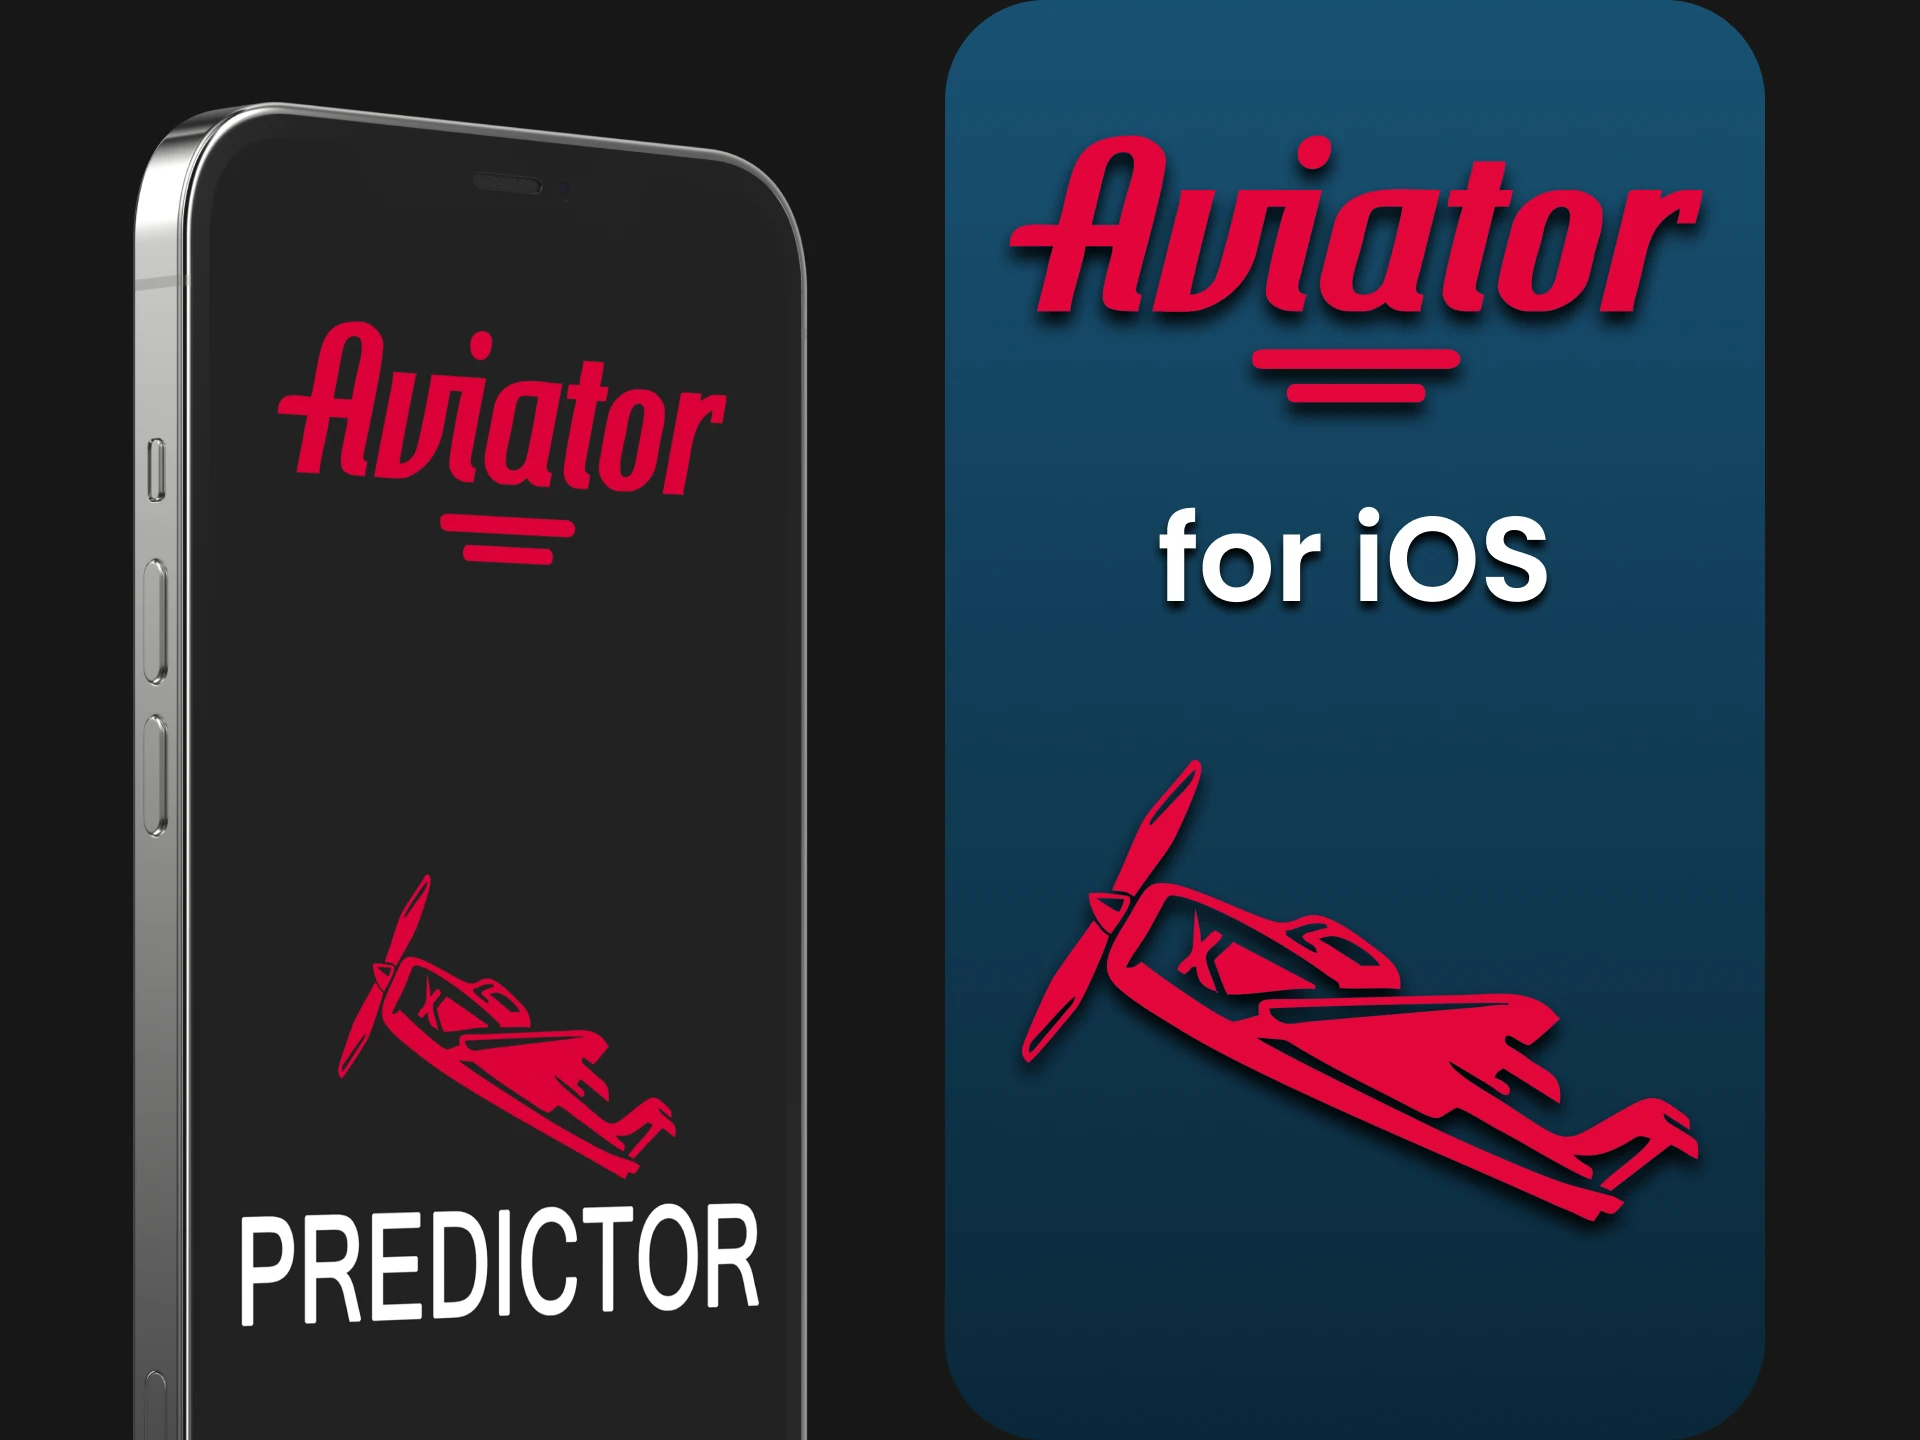 We will show you how to install Predictor for iOS.